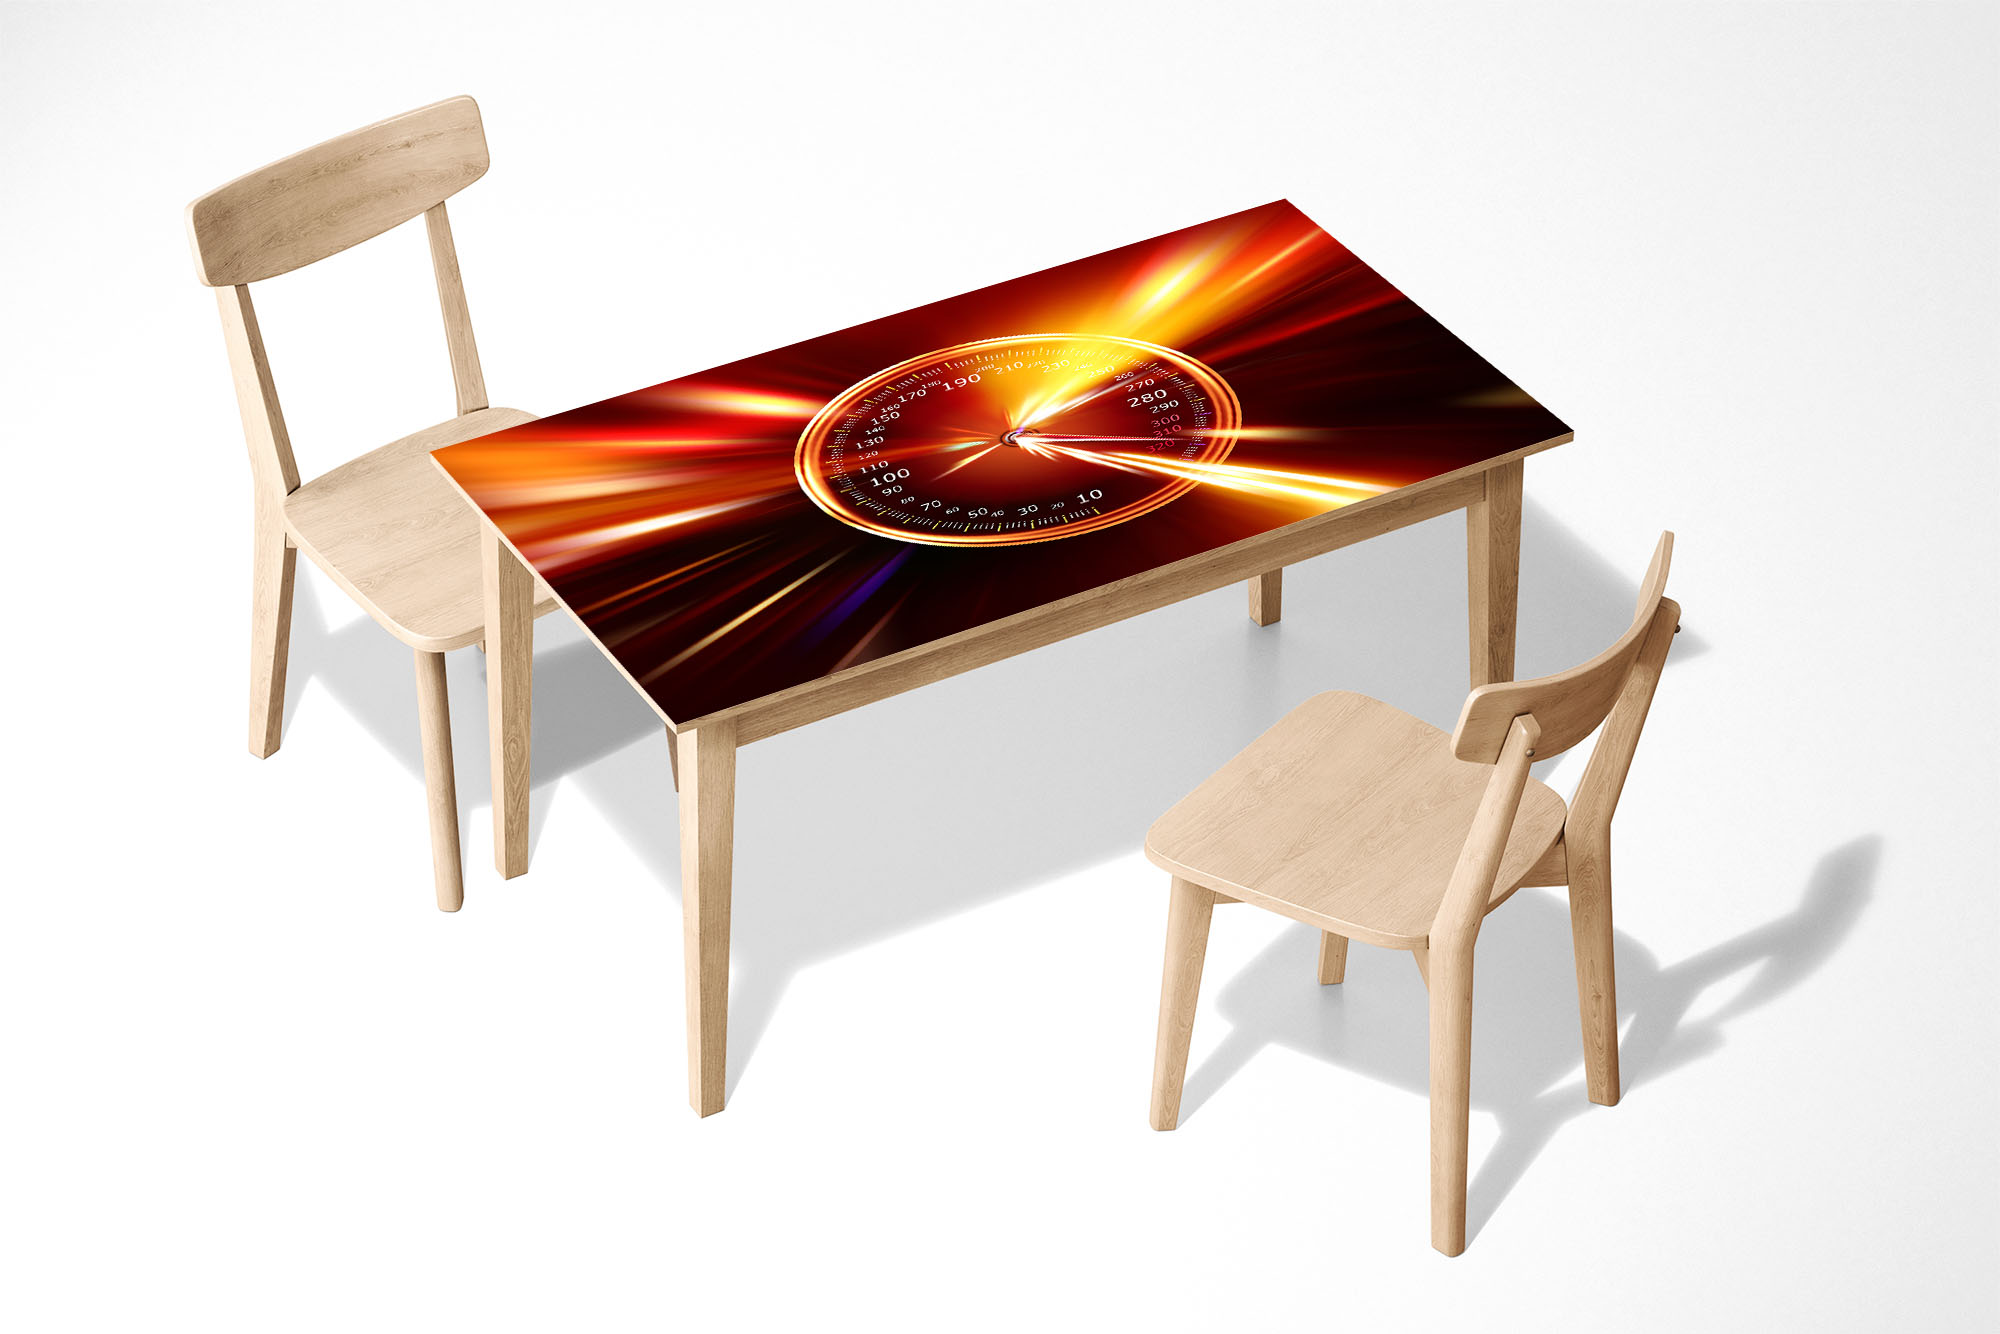 Speedometer in Fire Laminated Self Adhesive Vinyl Table Desk Art Décor Cover